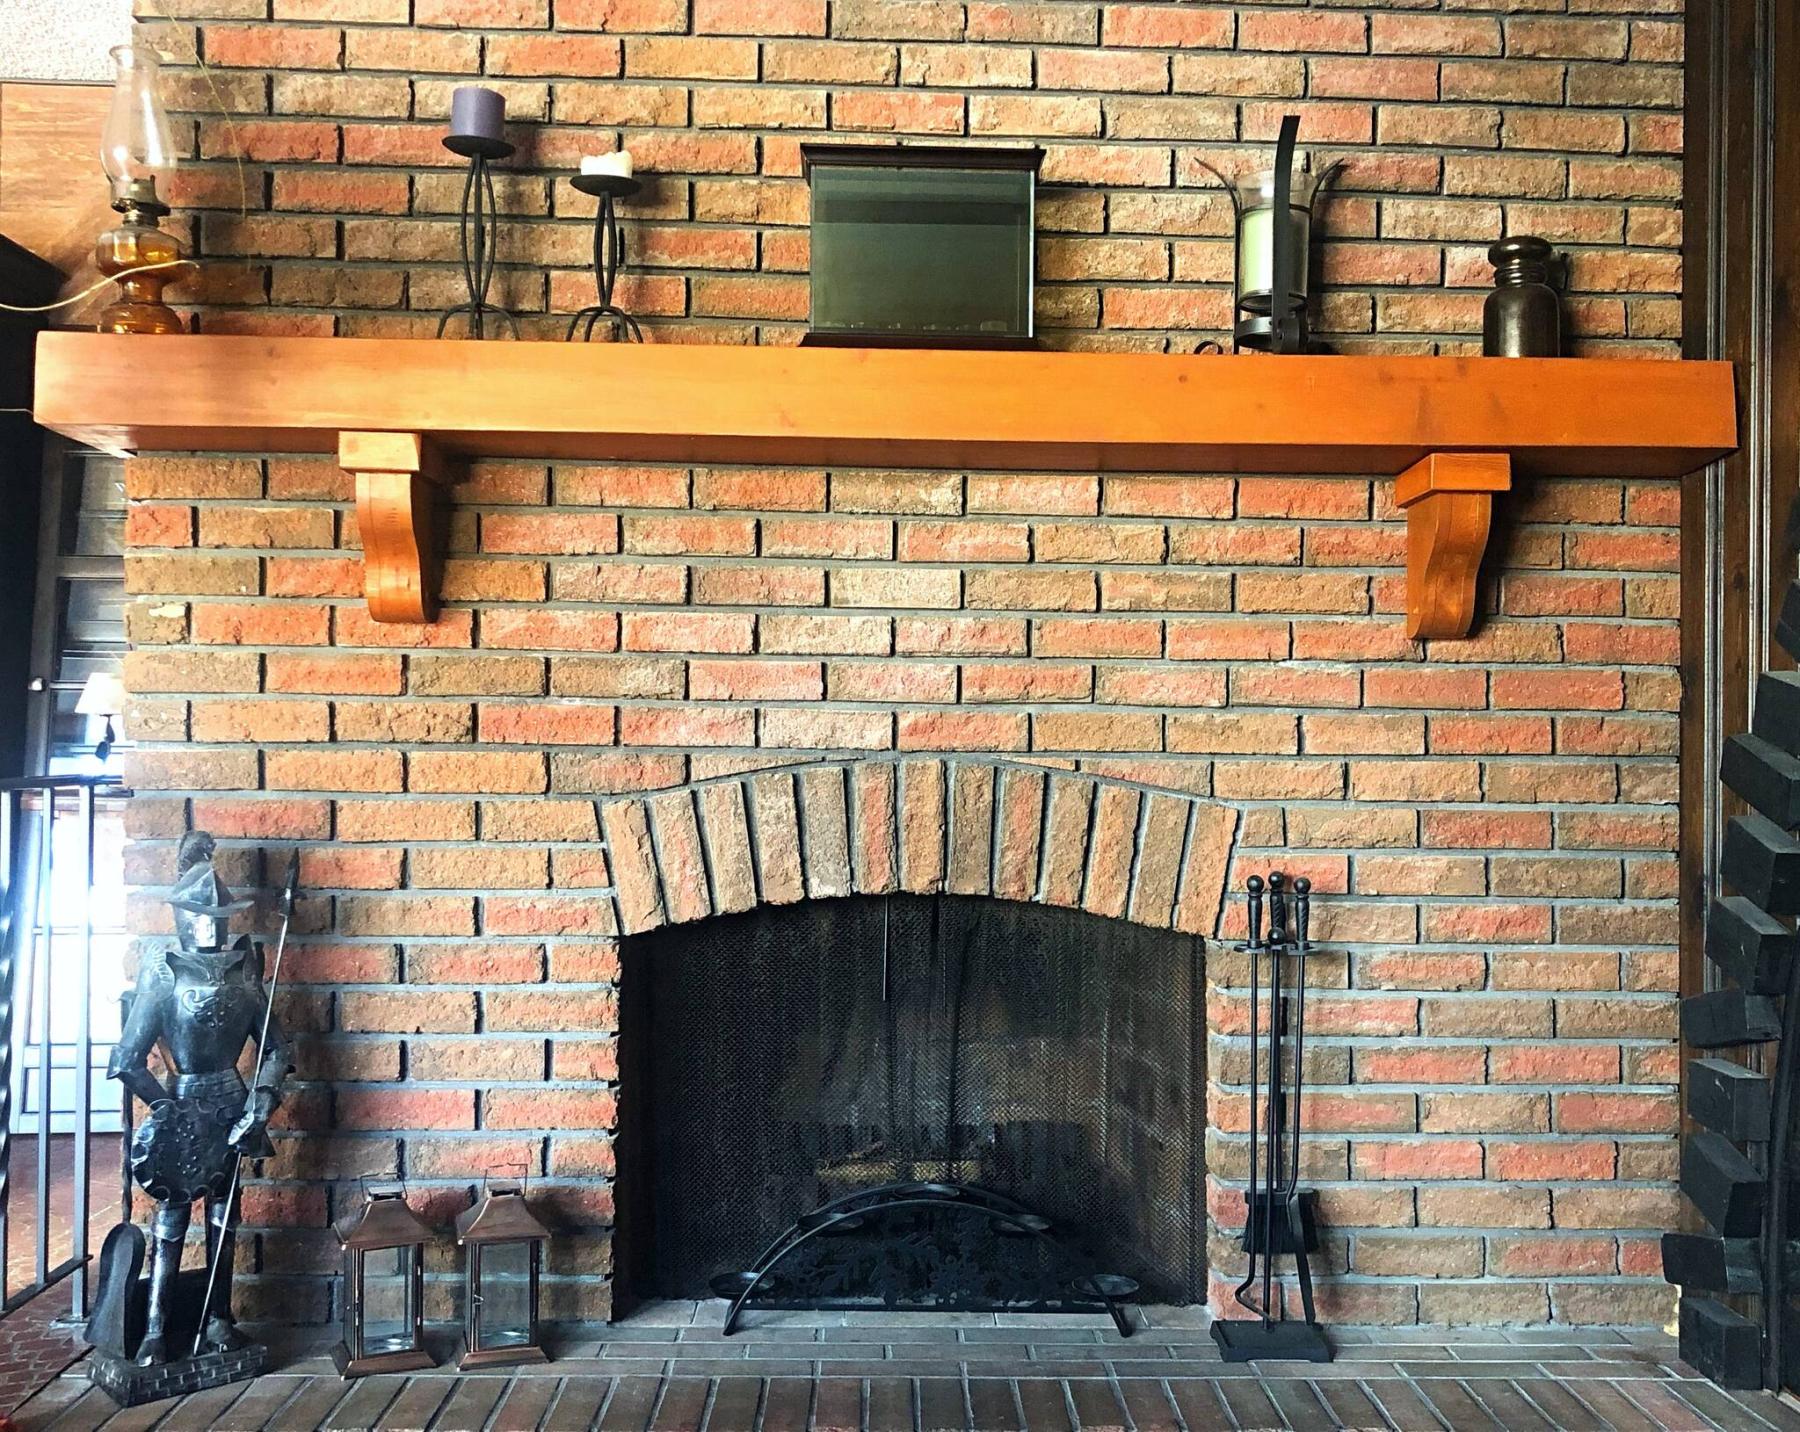  <p>Willy Williamson / Winnipeg Free Press</p>
                                <p>This fireplace is missing its Christmas stockings, but they will be hung with care soon.</p> 